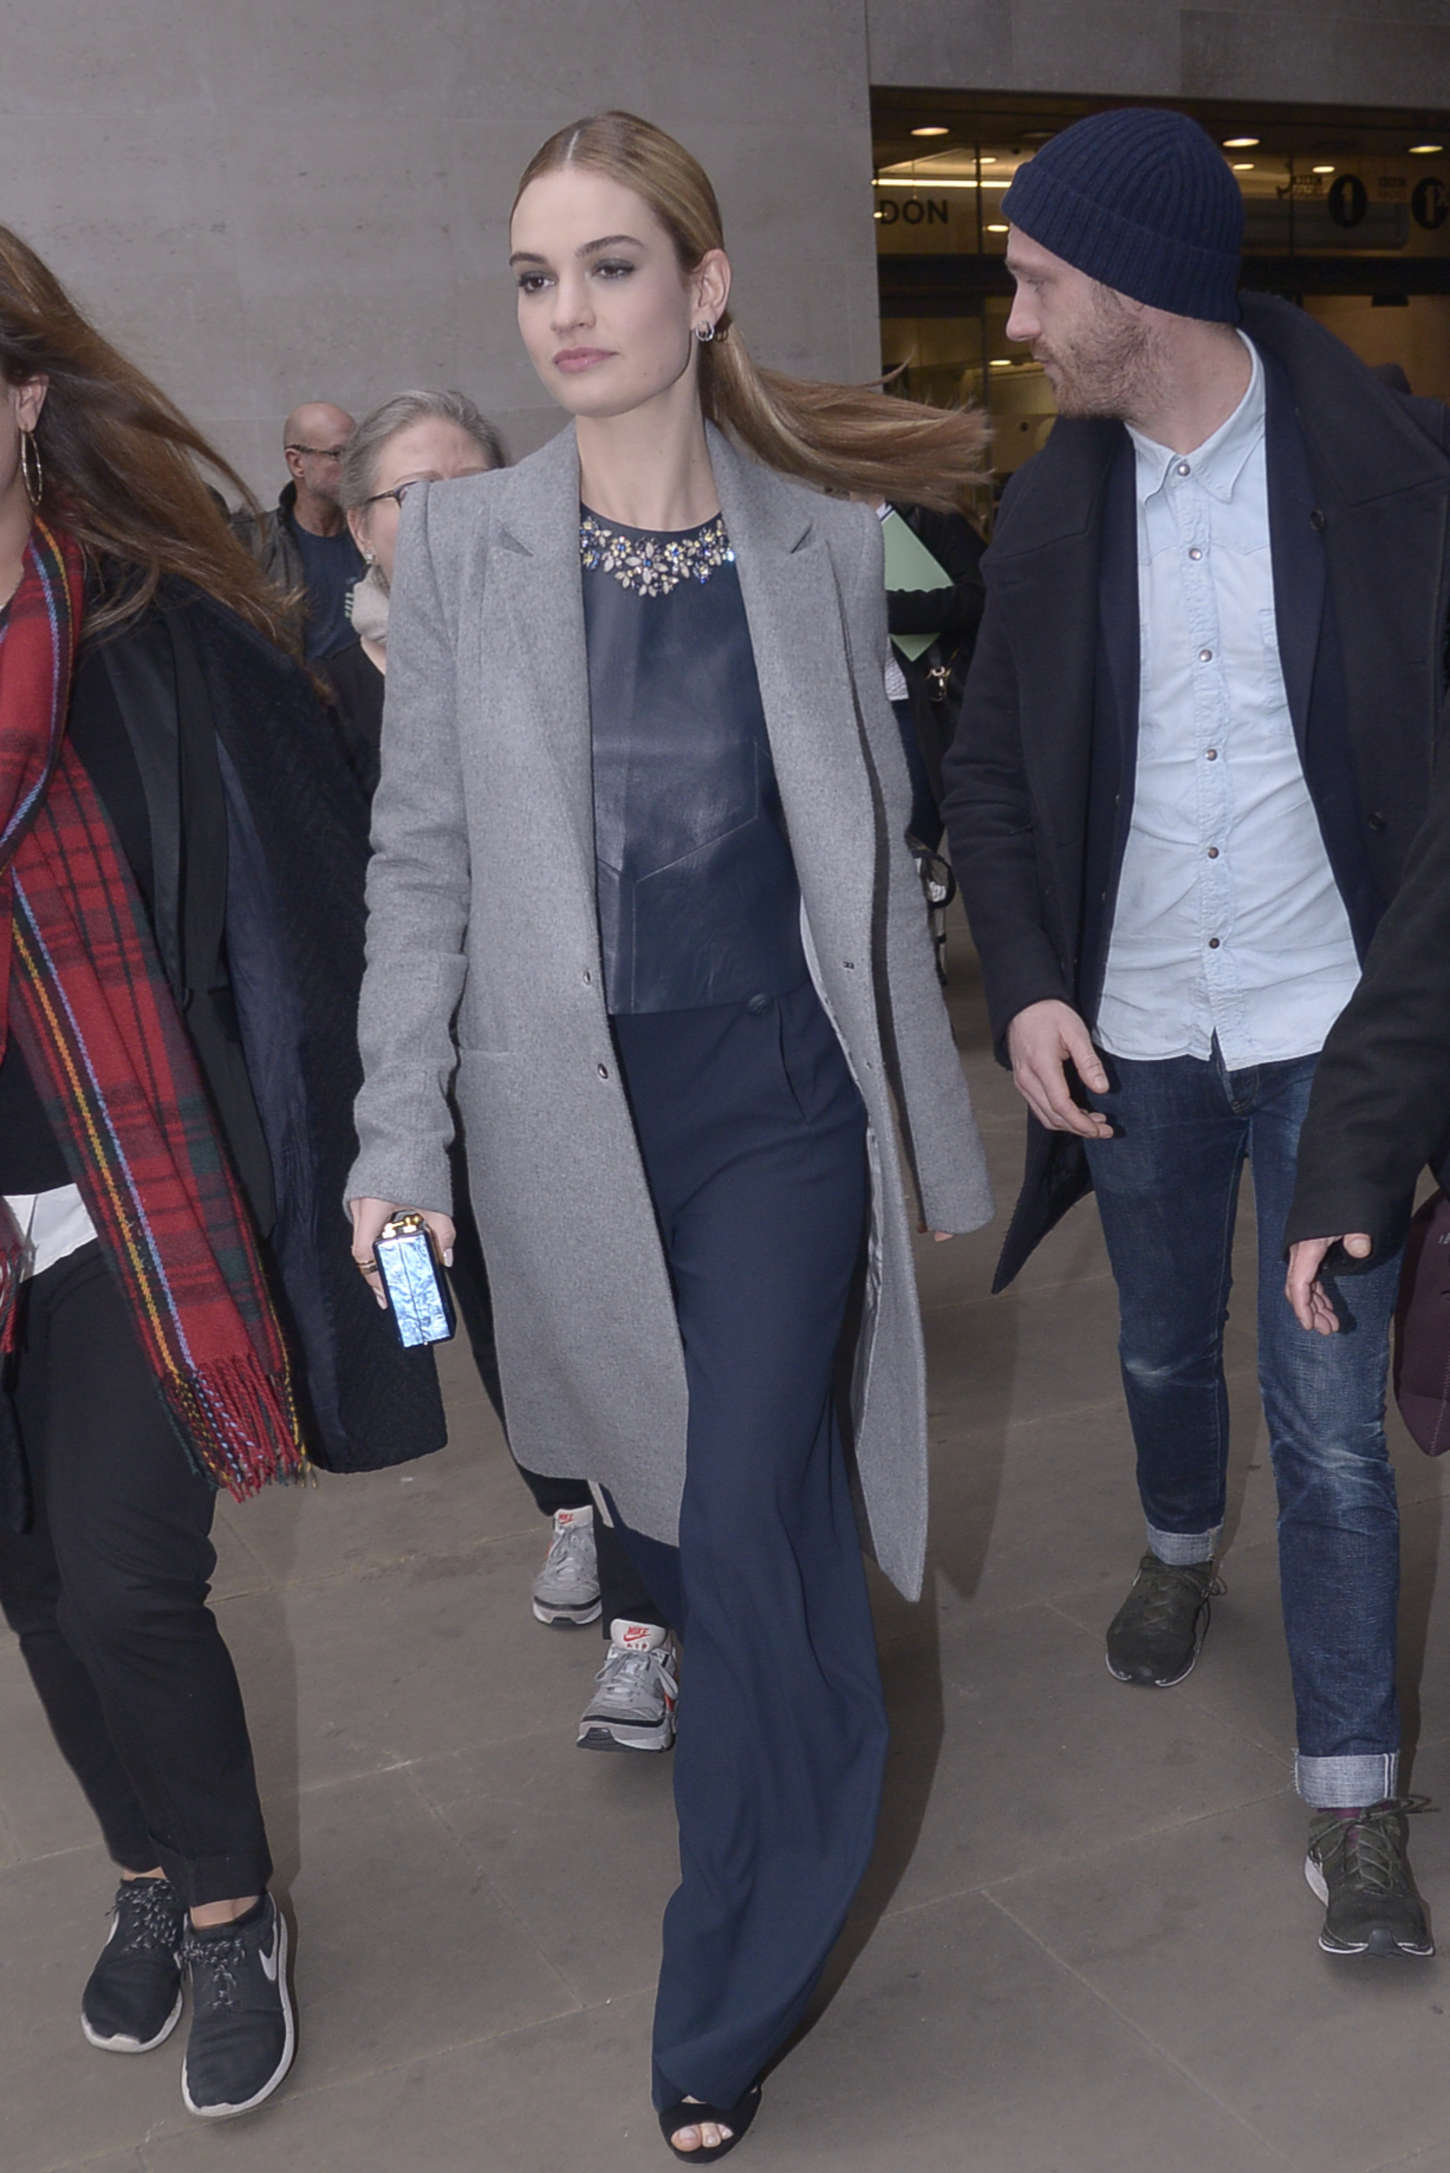 Lily James at BBC Radio 1 in London